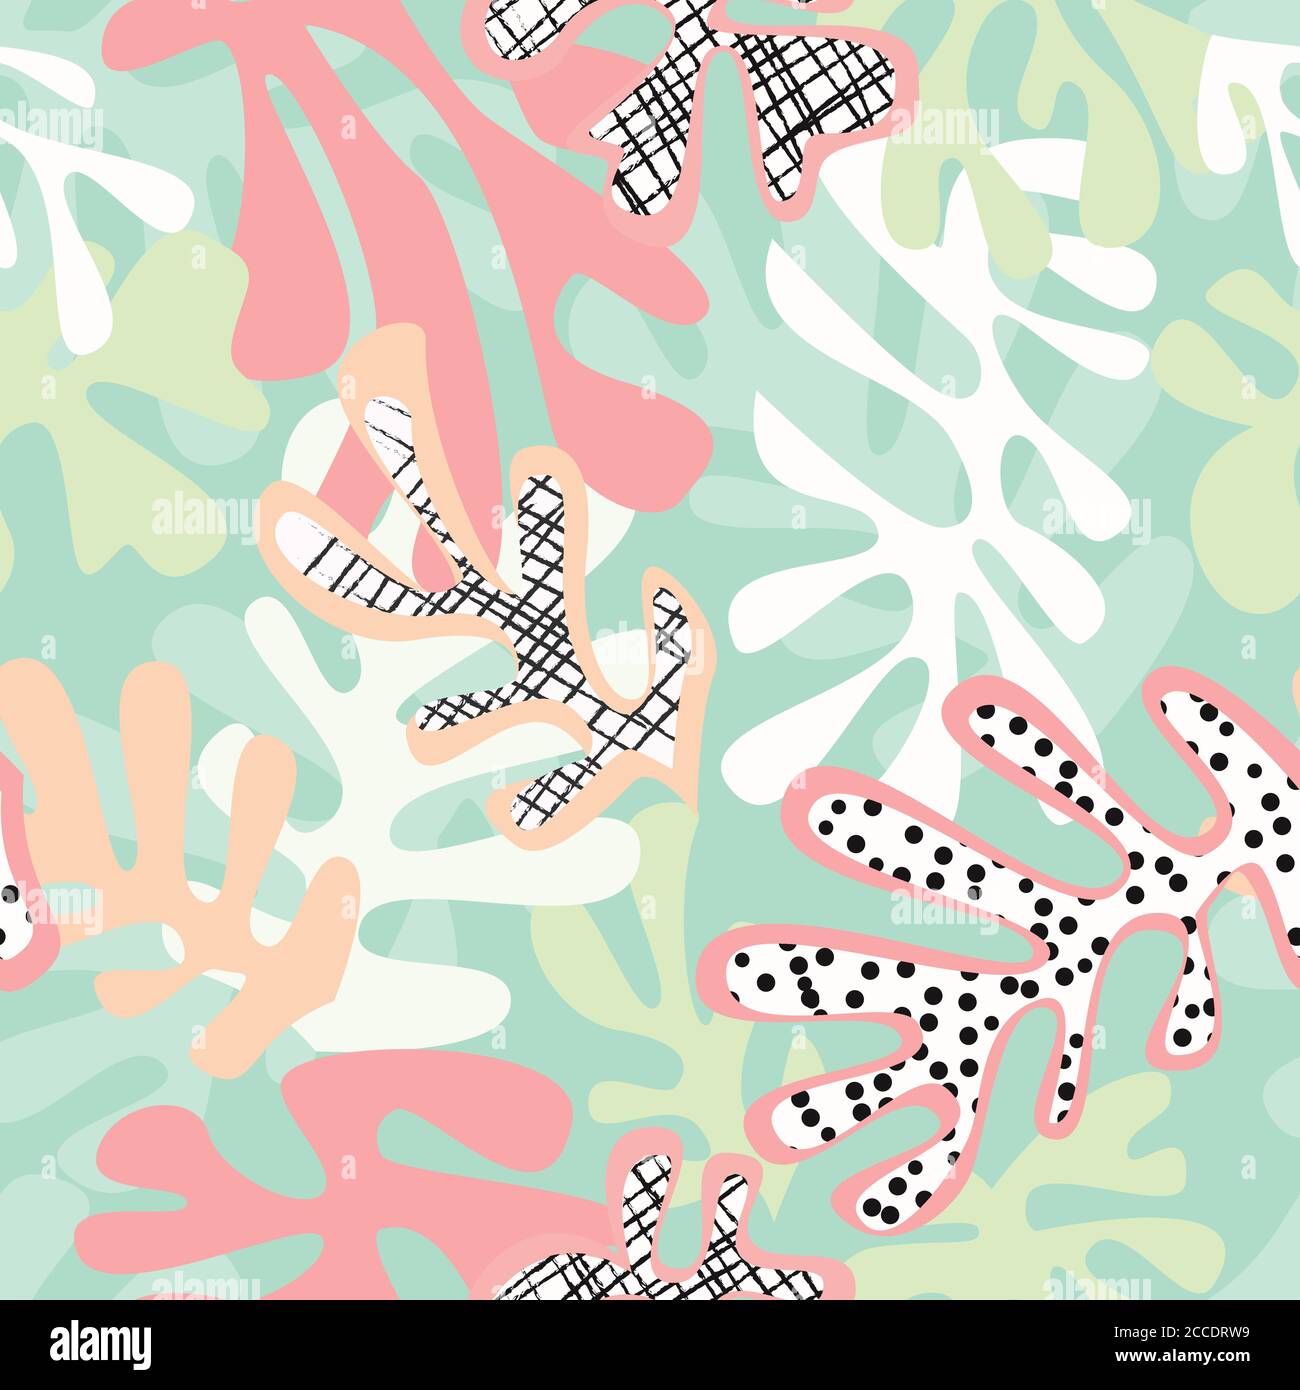 Matisse inspired shapes seamless pattern, colorful design, vector illustration Stock Vector